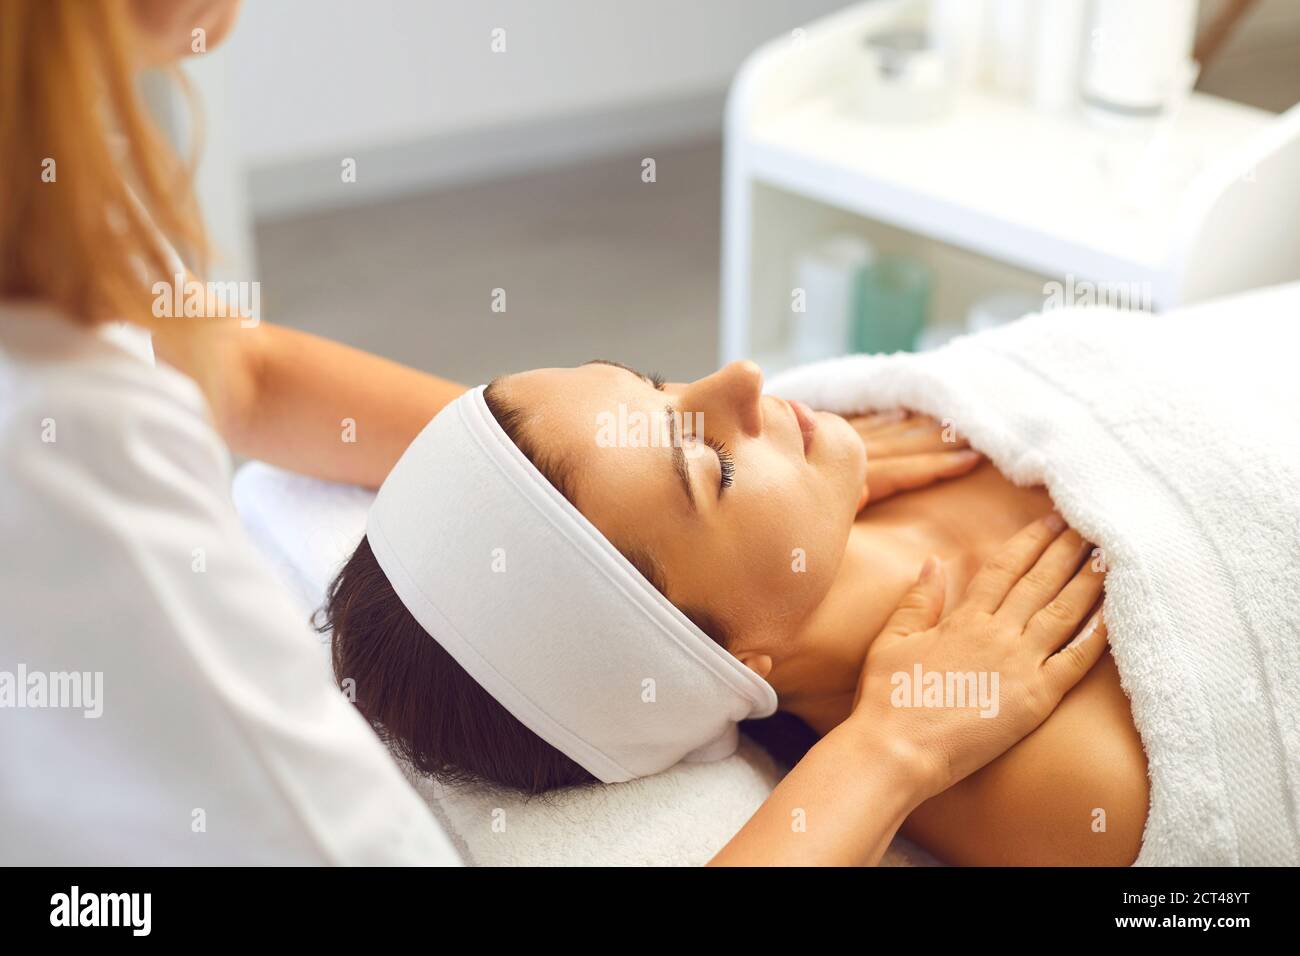 Woman patient getting manual relaxing rejuvenating massage for face and shoulders from therapist Stock Photo